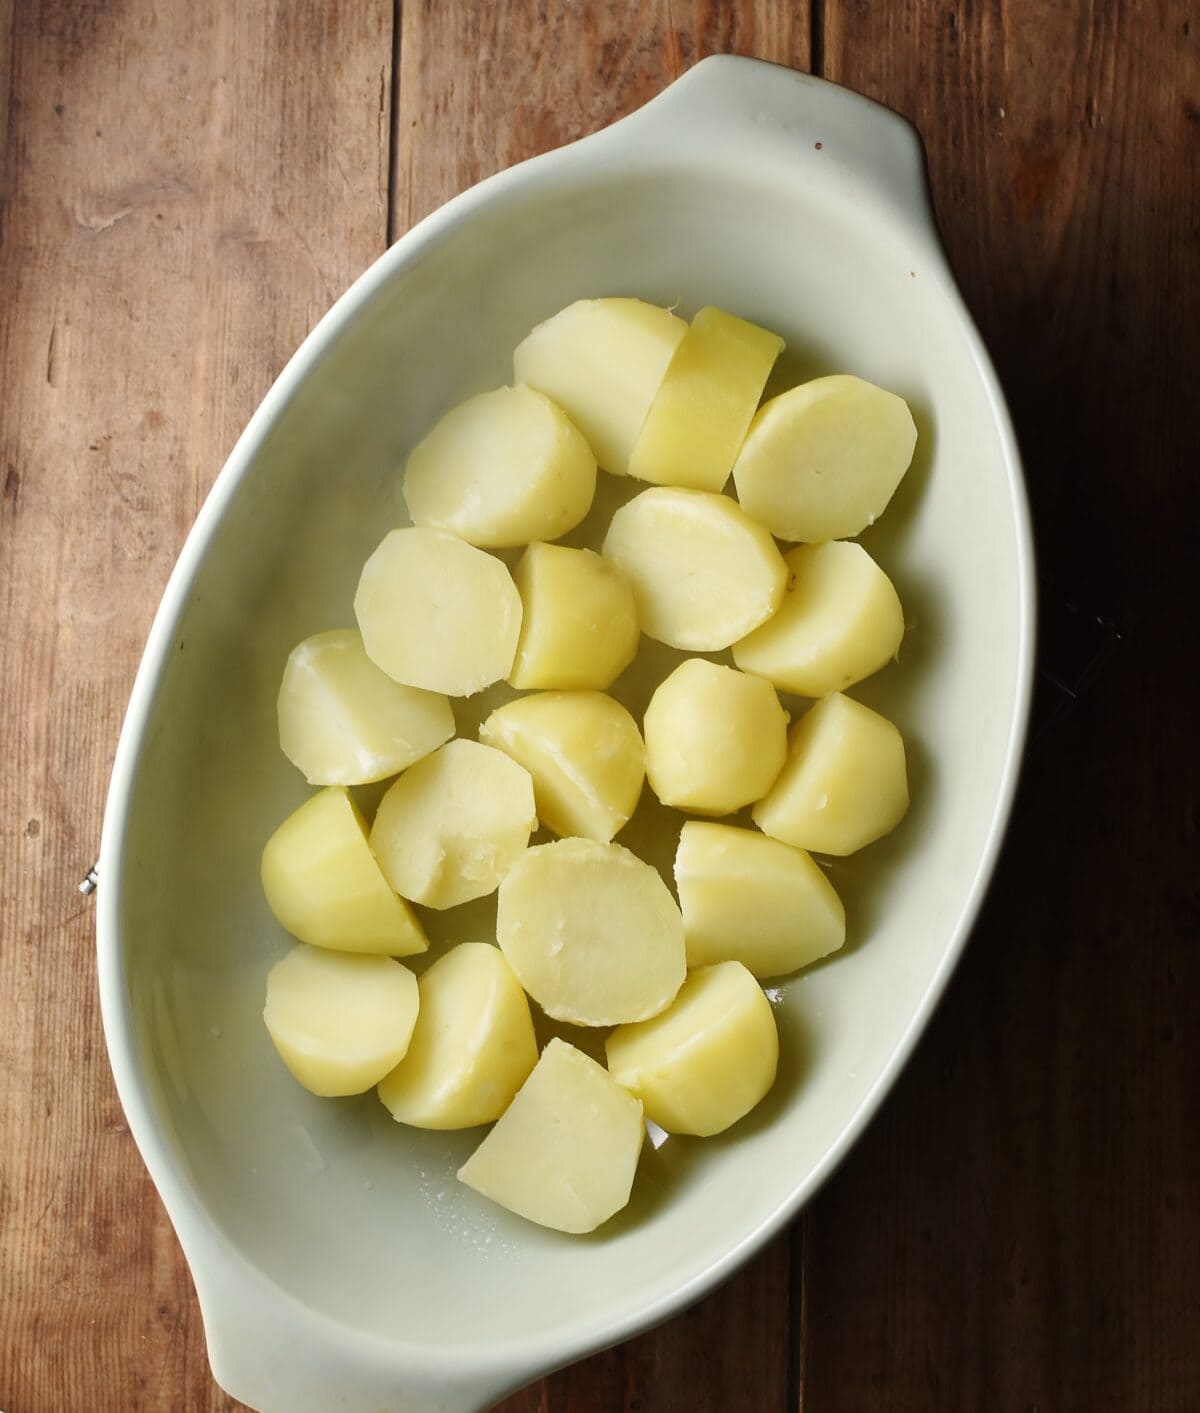 Potato pieces in oval dish.